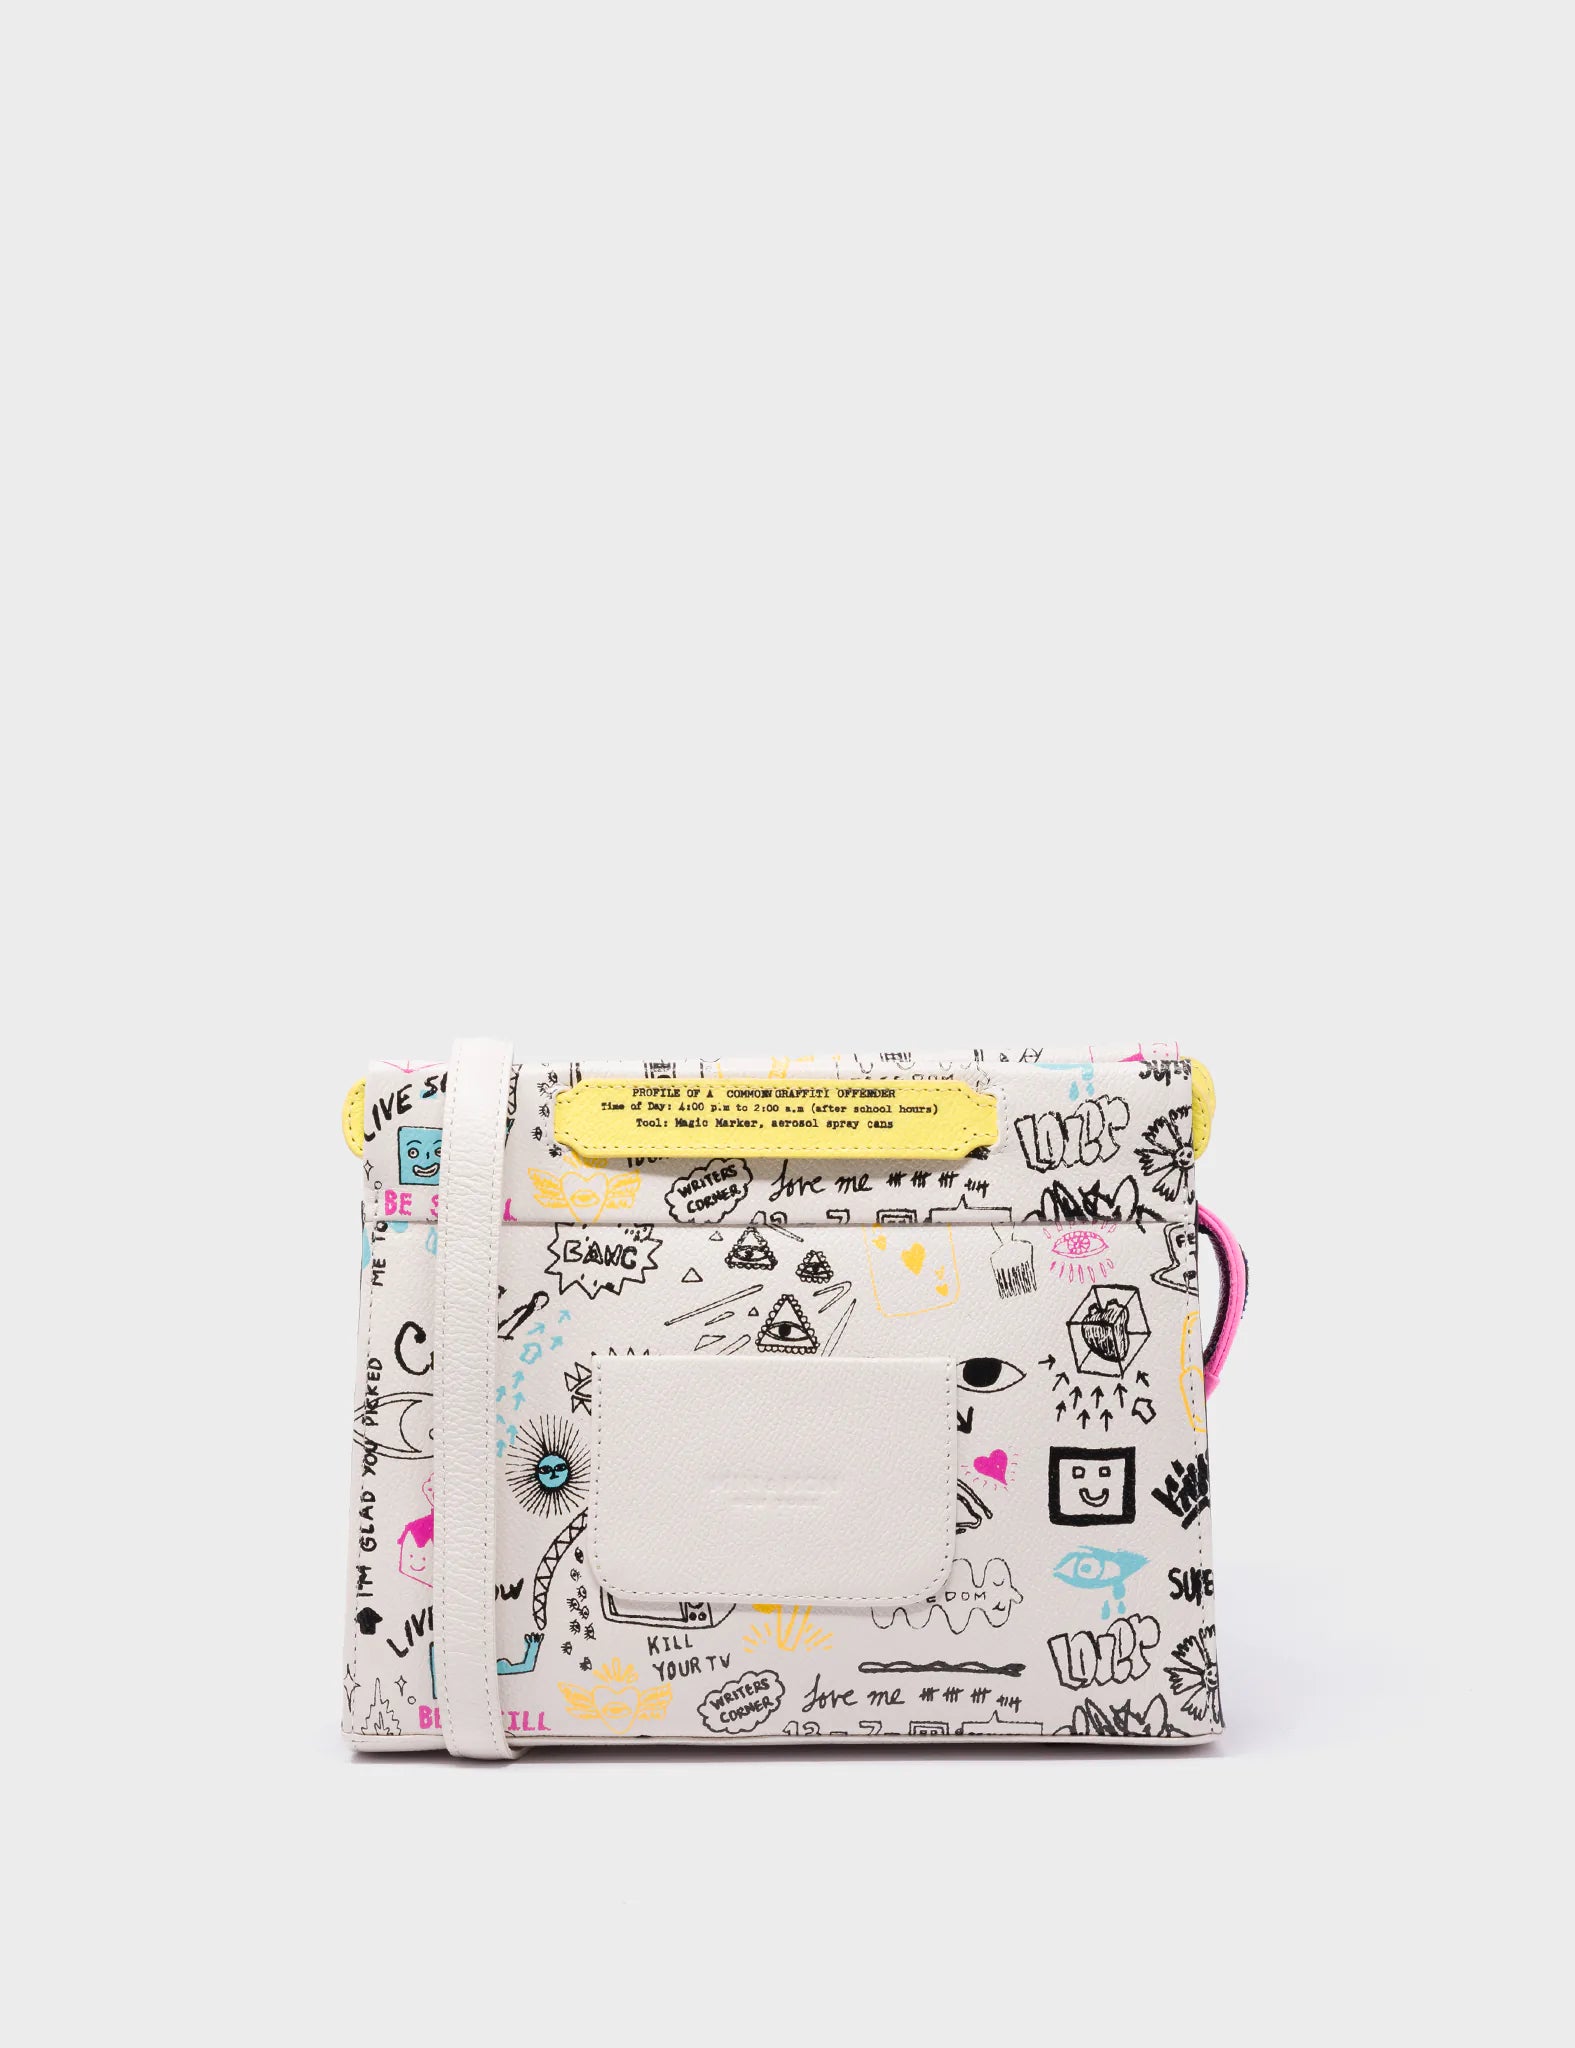 Vali Crossbody Small Cream Leather Bag - Urban Doodles Print and Eyes Applique - Back View